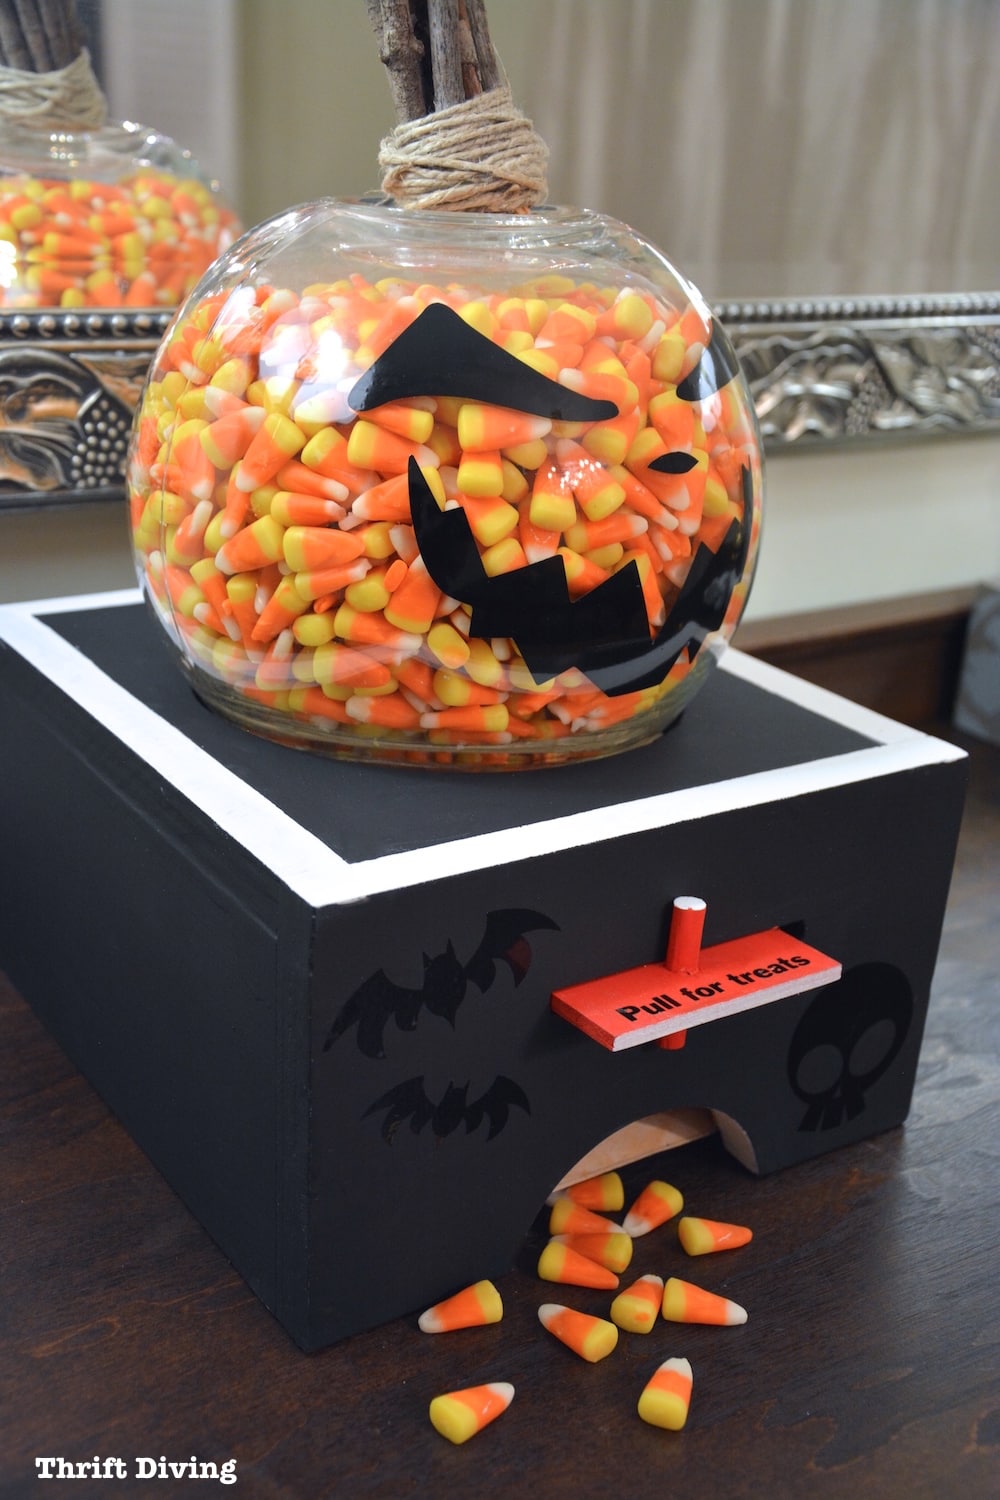 How to Make a DIY Candy Dispenser for Halloween